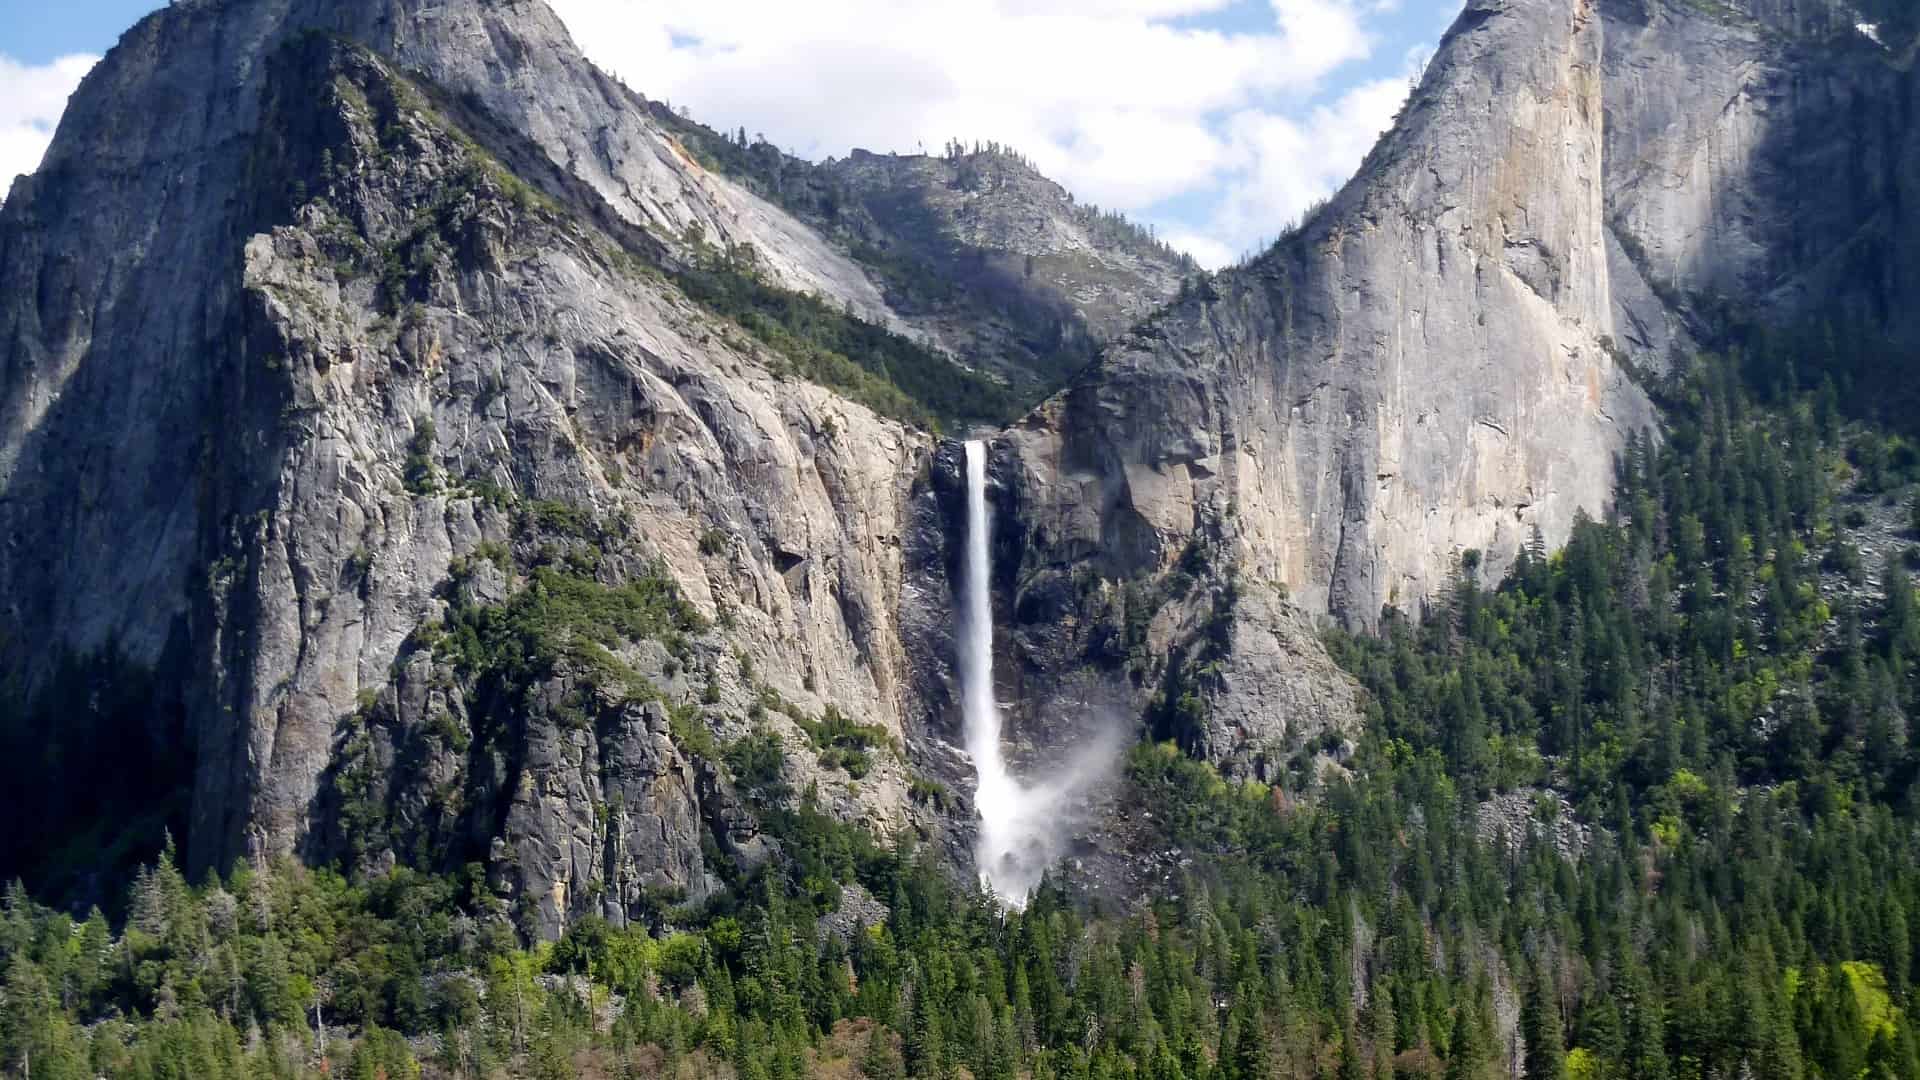 Bridalveil Fall in Yosemite National Park, a stunning waterfall plunging from the granite cliffs surrounded by pine forests, with mist rising from the base of the fall, set against a background of rugged mountain terrain